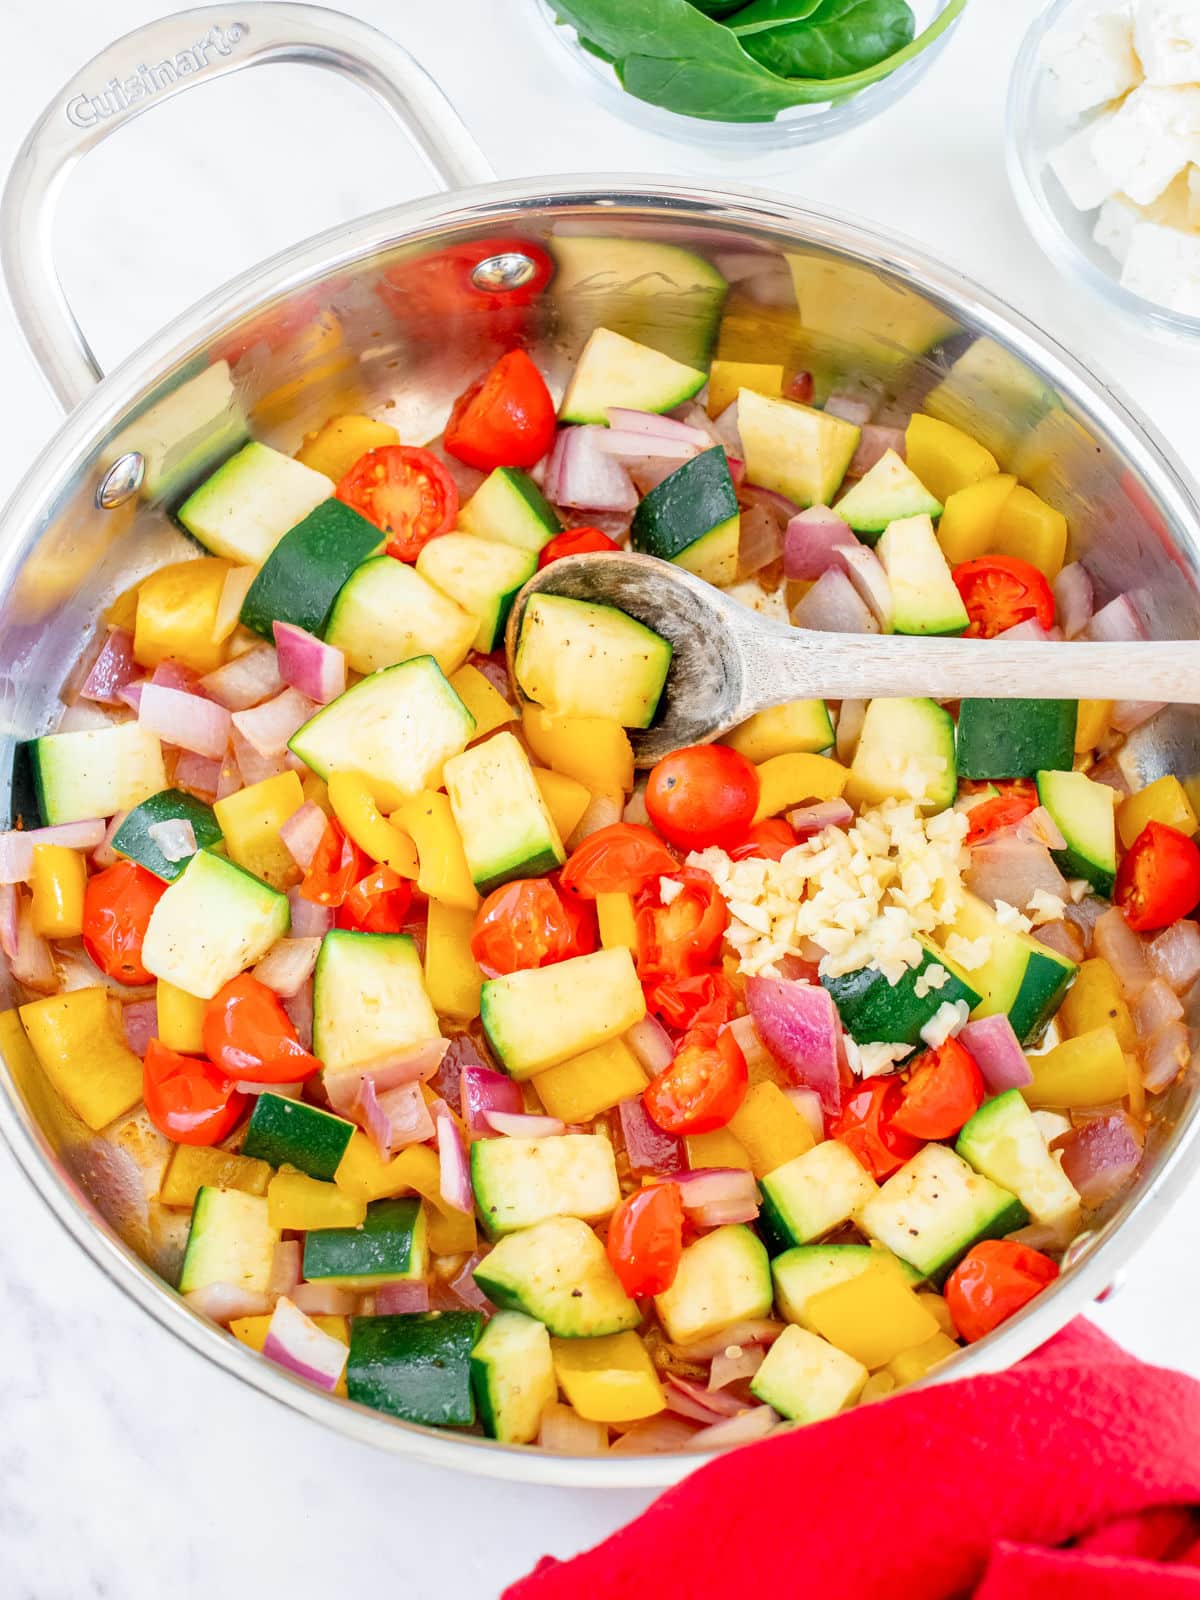 A variety of chopped vegetables including zucchini, tomatoes, bell peppers, and onions in a stainless steel pan with a wooden spoon.